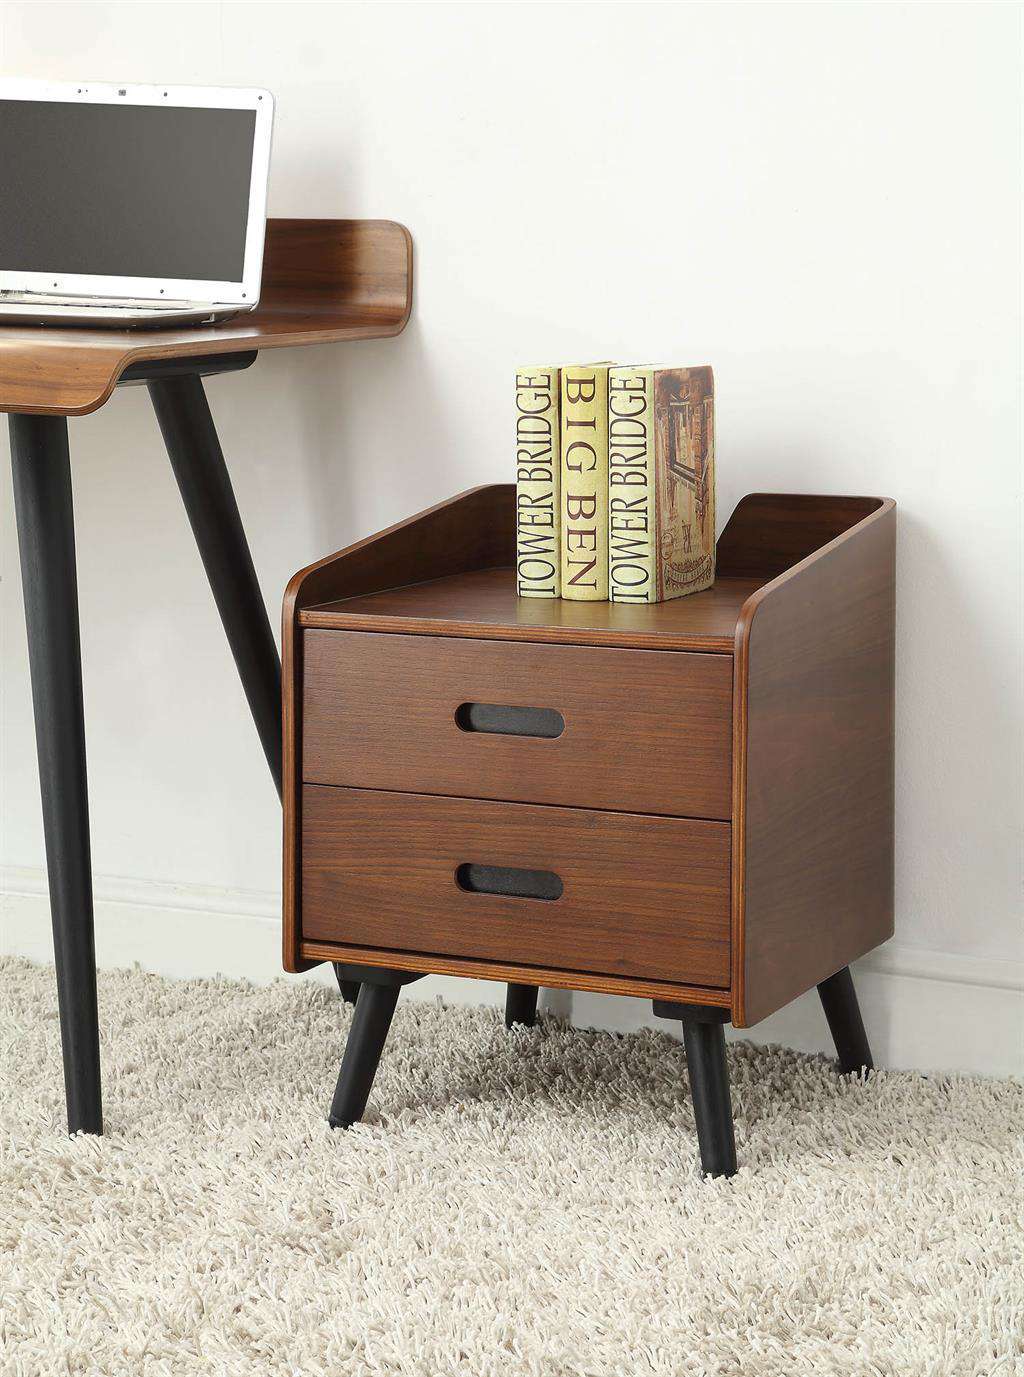 Jual Vienna PC610 Walnut Desk Pedestal With 2 Drawers by Jual Furnishings in use.